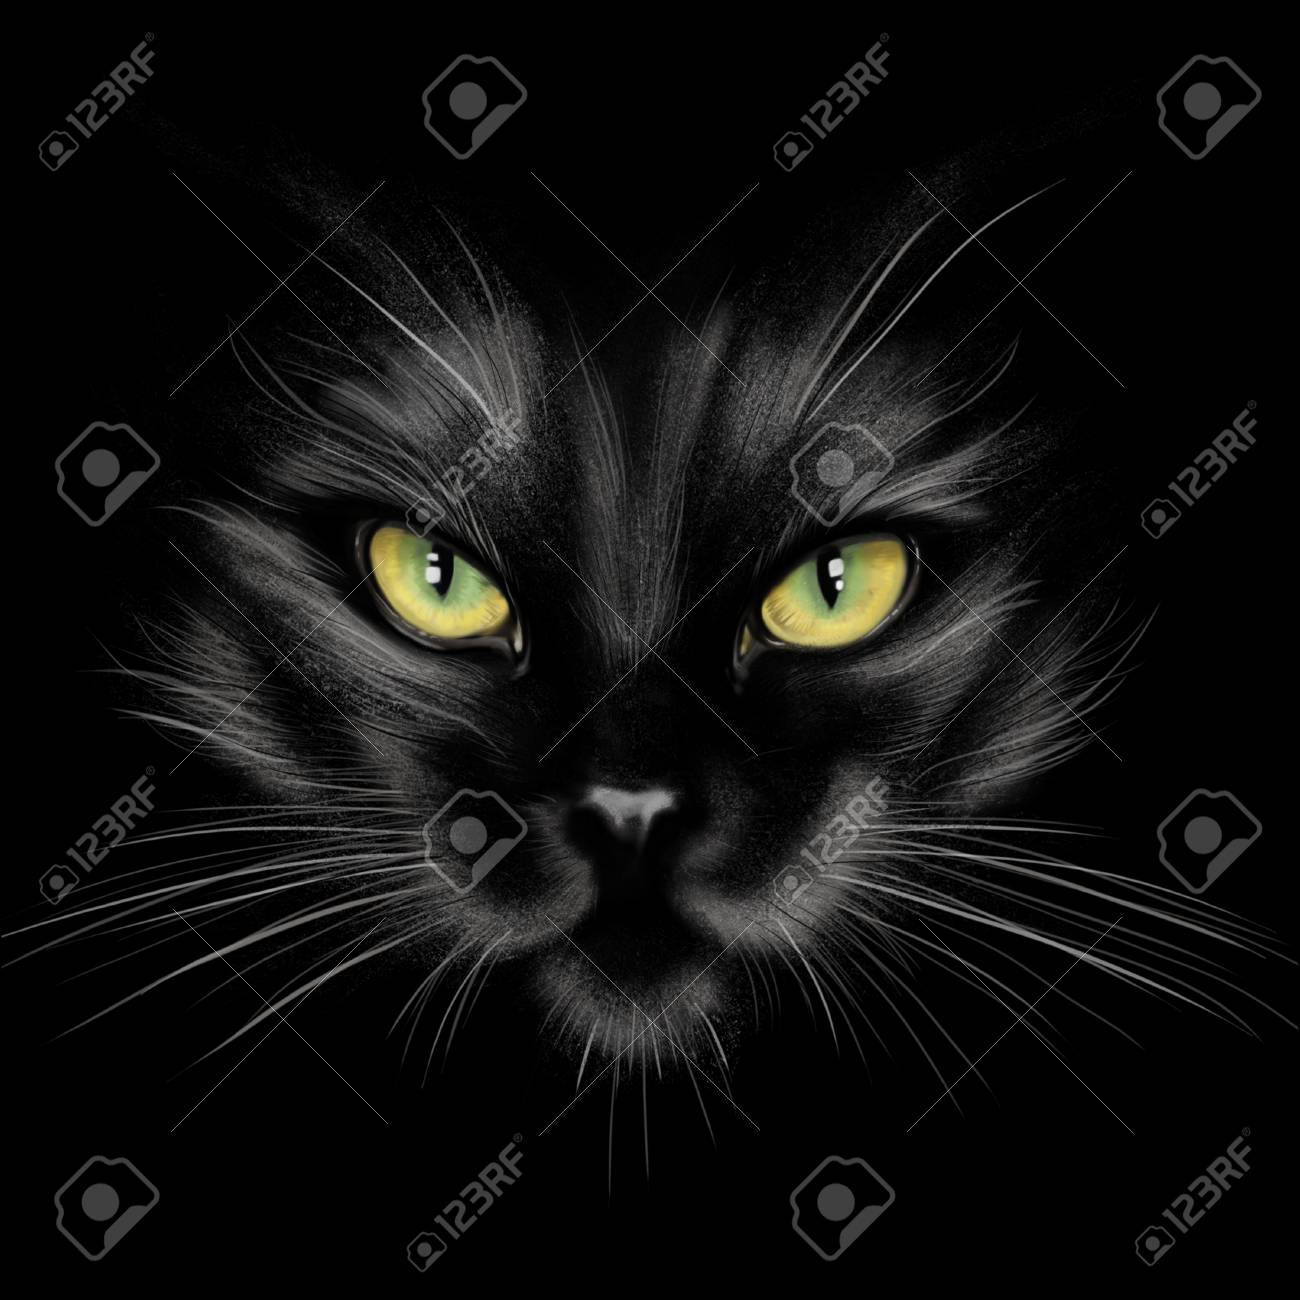 Hand Drawing Portrait Of A Black Cat On Background Stock